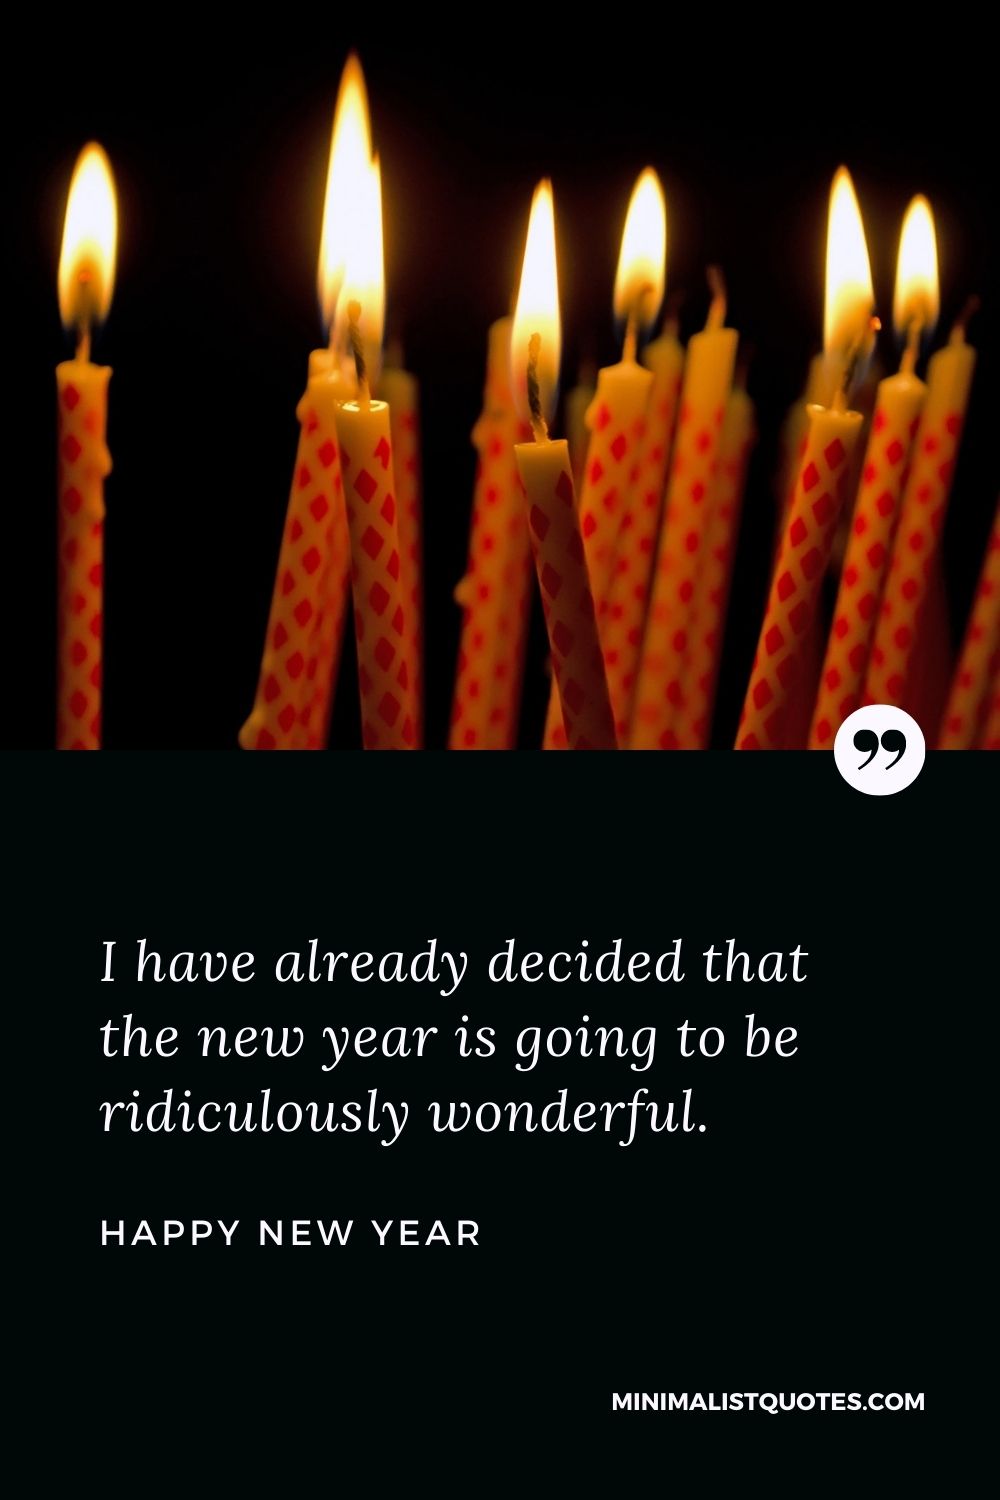 New Year Wish - I have already decided that the new year is going to be ridiculously wonderful.